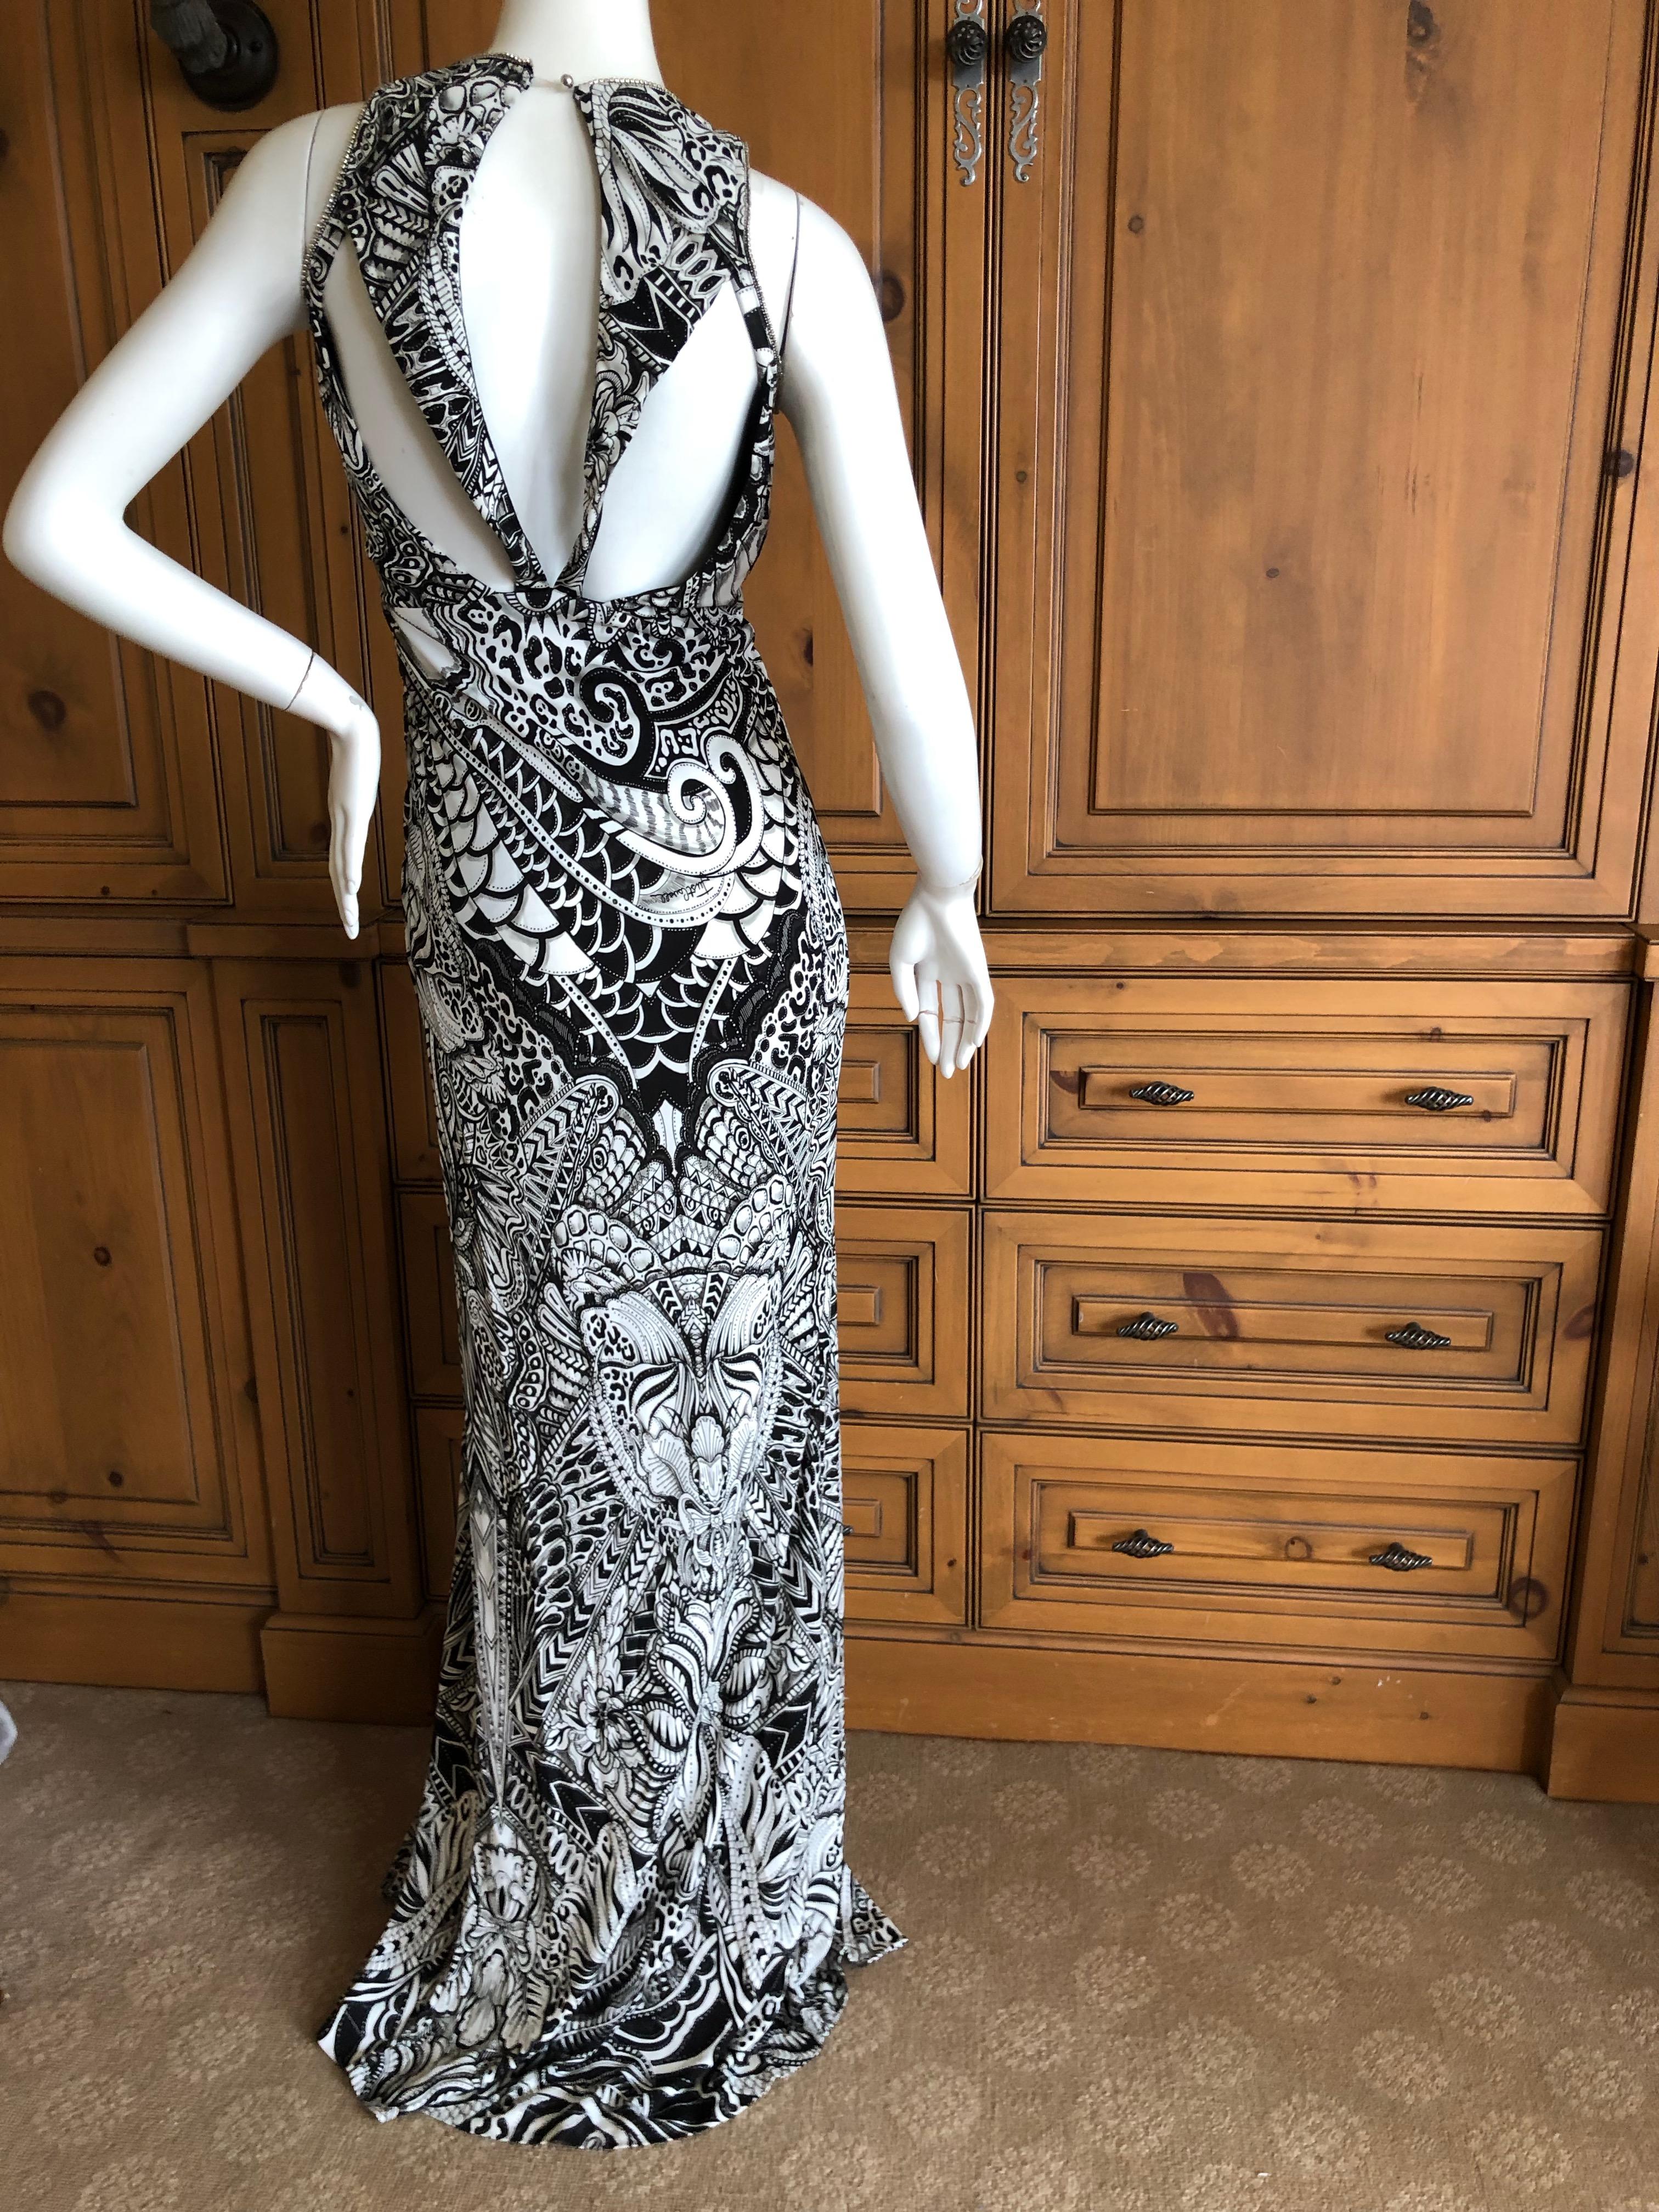 Roberto Cavalli for Just Cavalli Crystal Trimmed Low Cut Graphic Evening Dress
Wonderful colors, there is a lot of crystal which doesn't show well in the photos.
So pretty
Size 38, there is a lot of stretch
 Bust 36